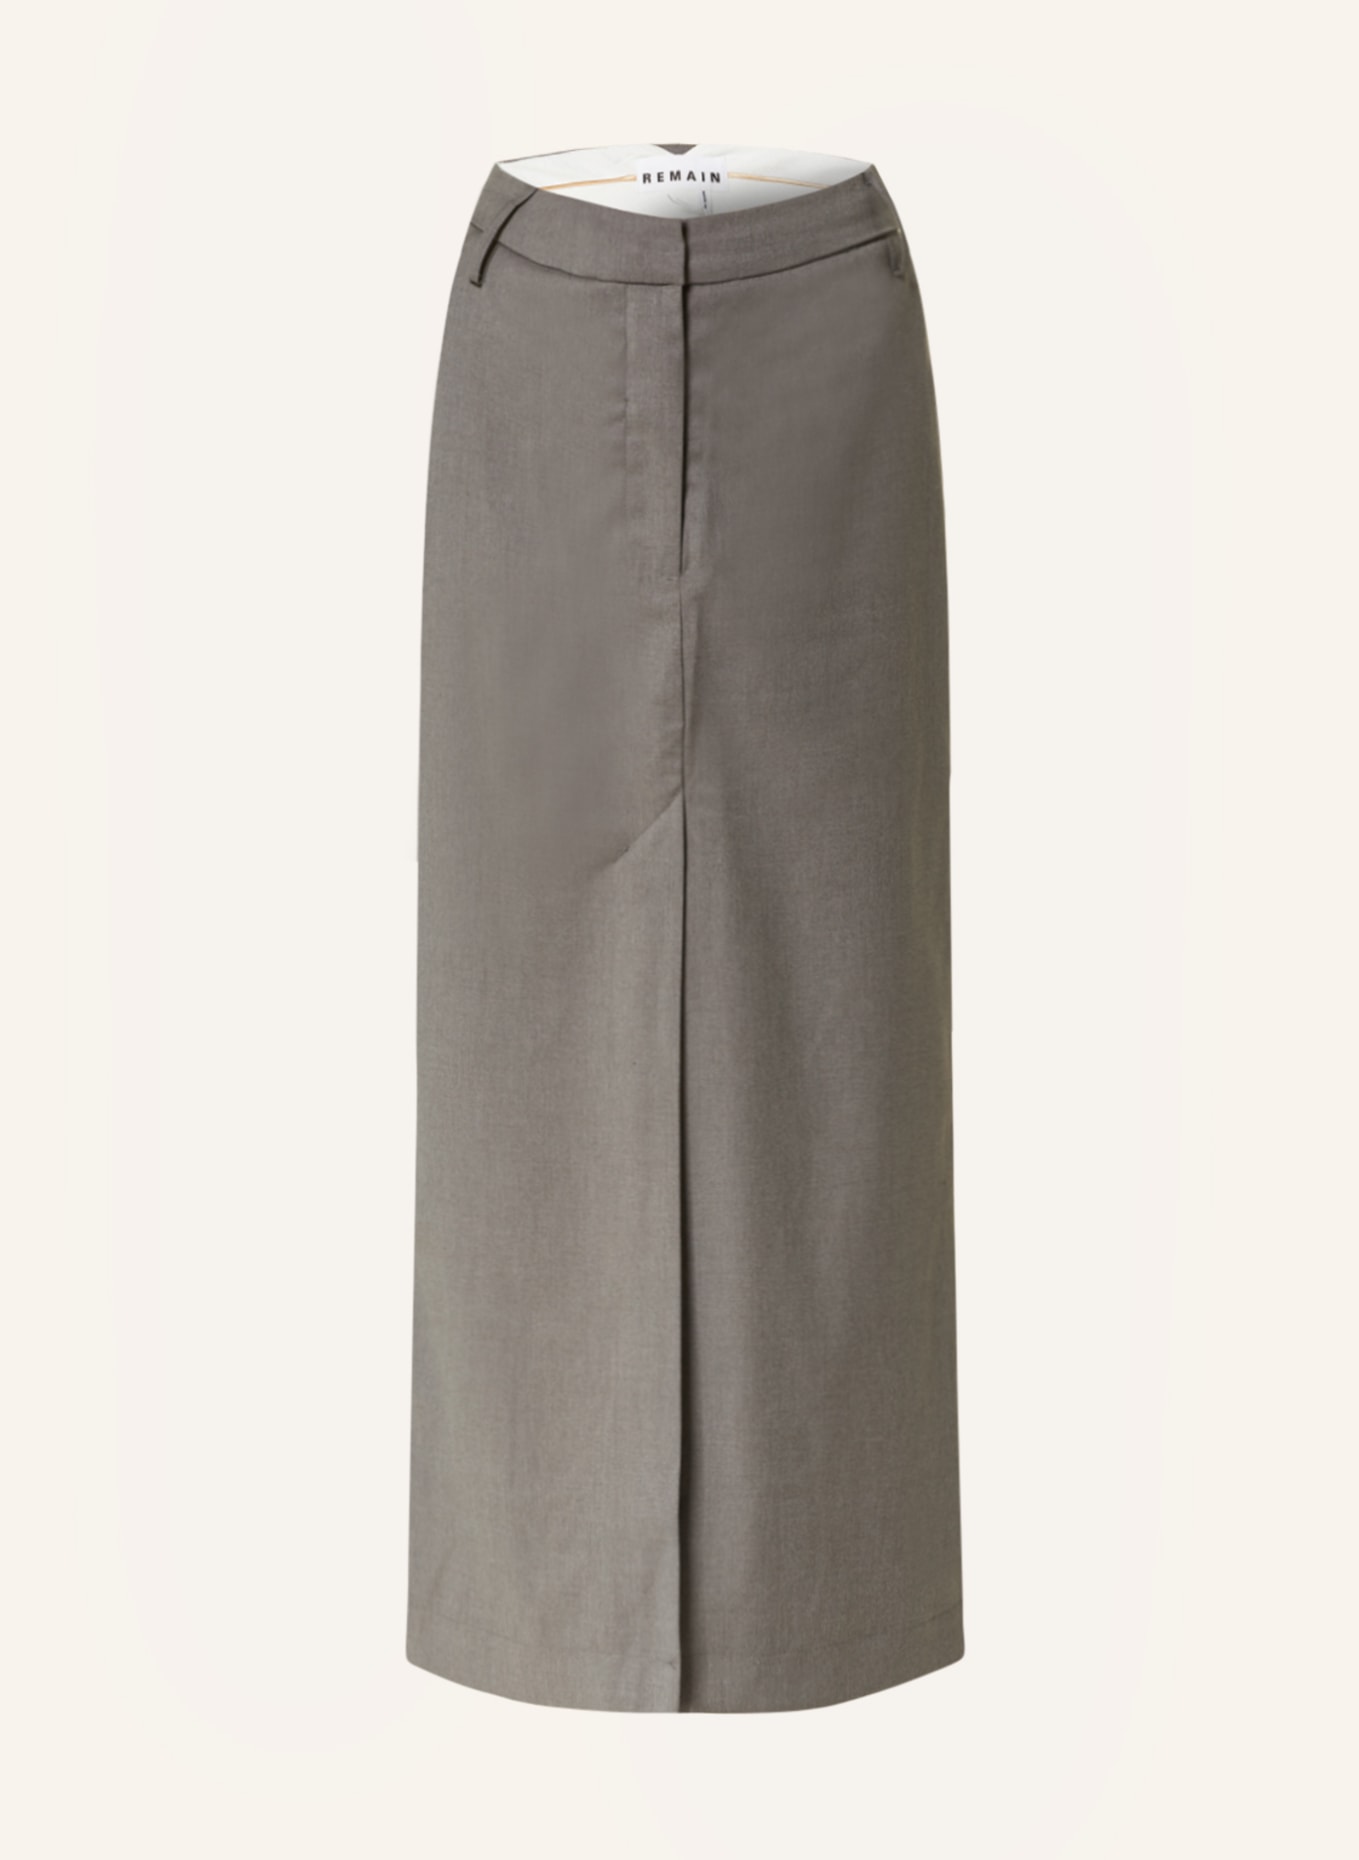 REMAIN Skirt, Color: GRAY (Image 1)